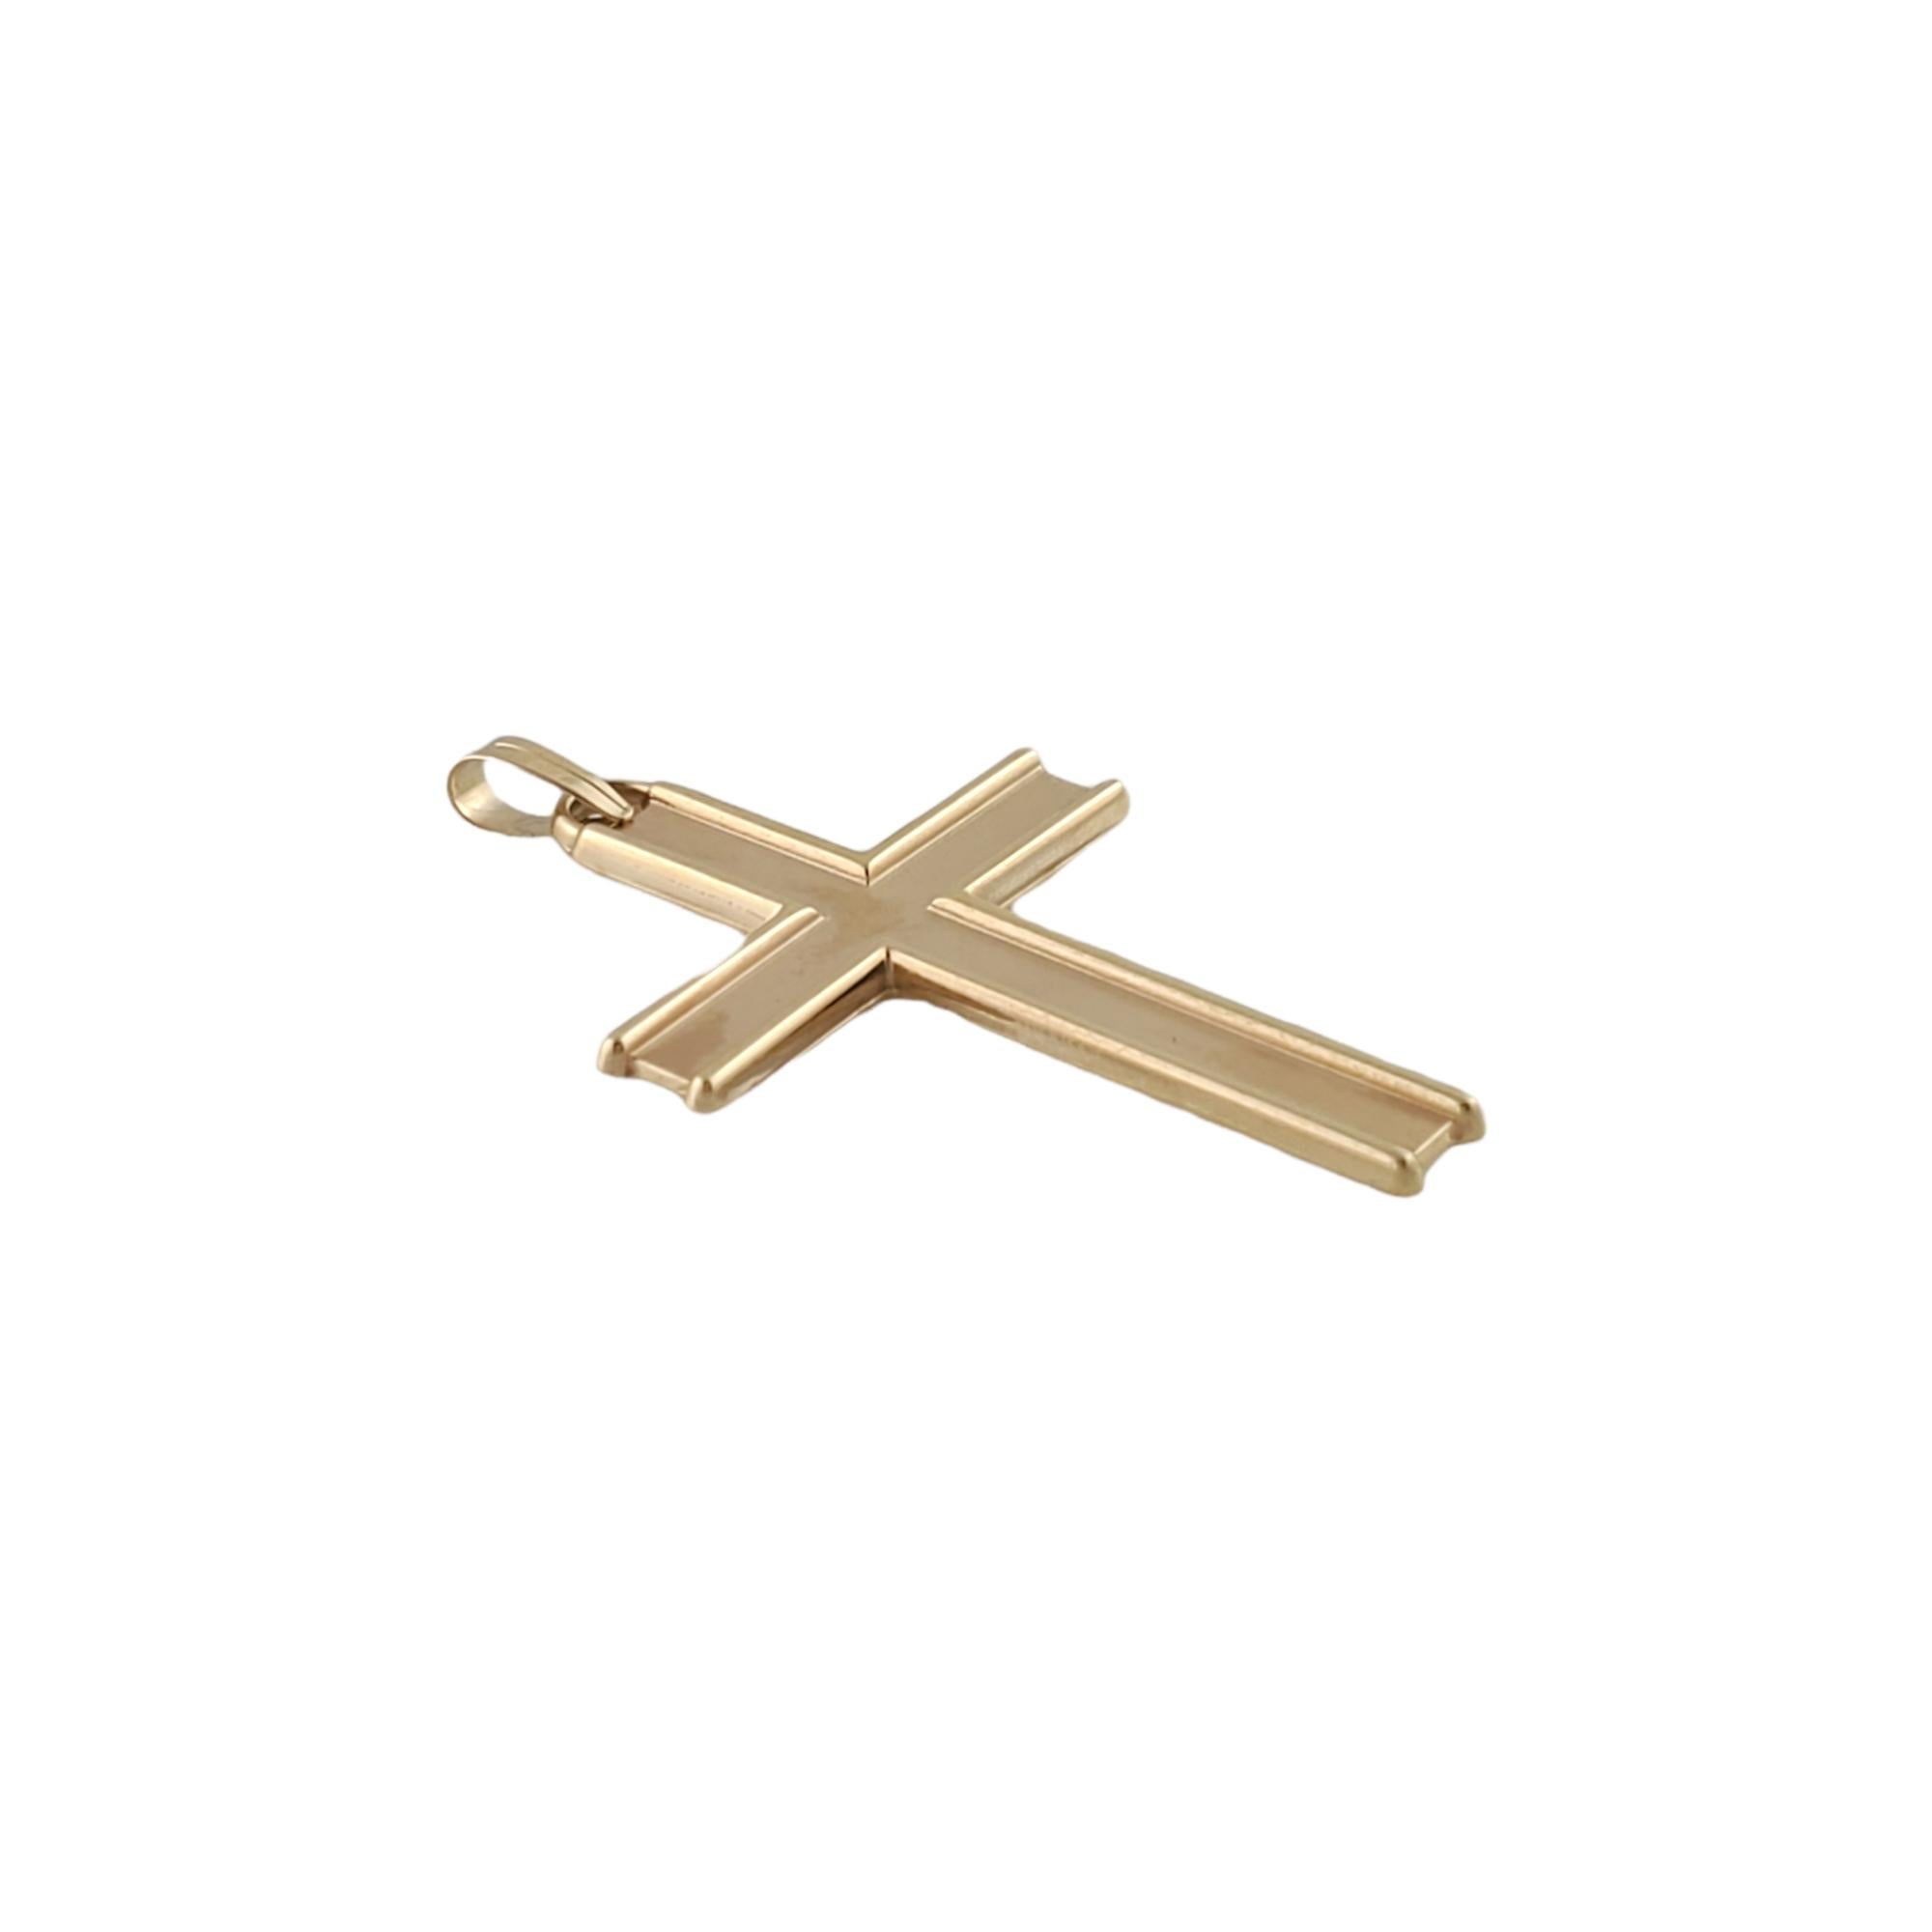 14K Yellow Gold Cross Pendant

You'll love this elegant 14K yellow gold cross pendant!

Size: 16mm X 26mm

Weight: 1.8 gr/ 1.2 dwt

Hallmark: 14K

Very good condition, professionally polished.

Will come packaged in a gift box or pouch (when